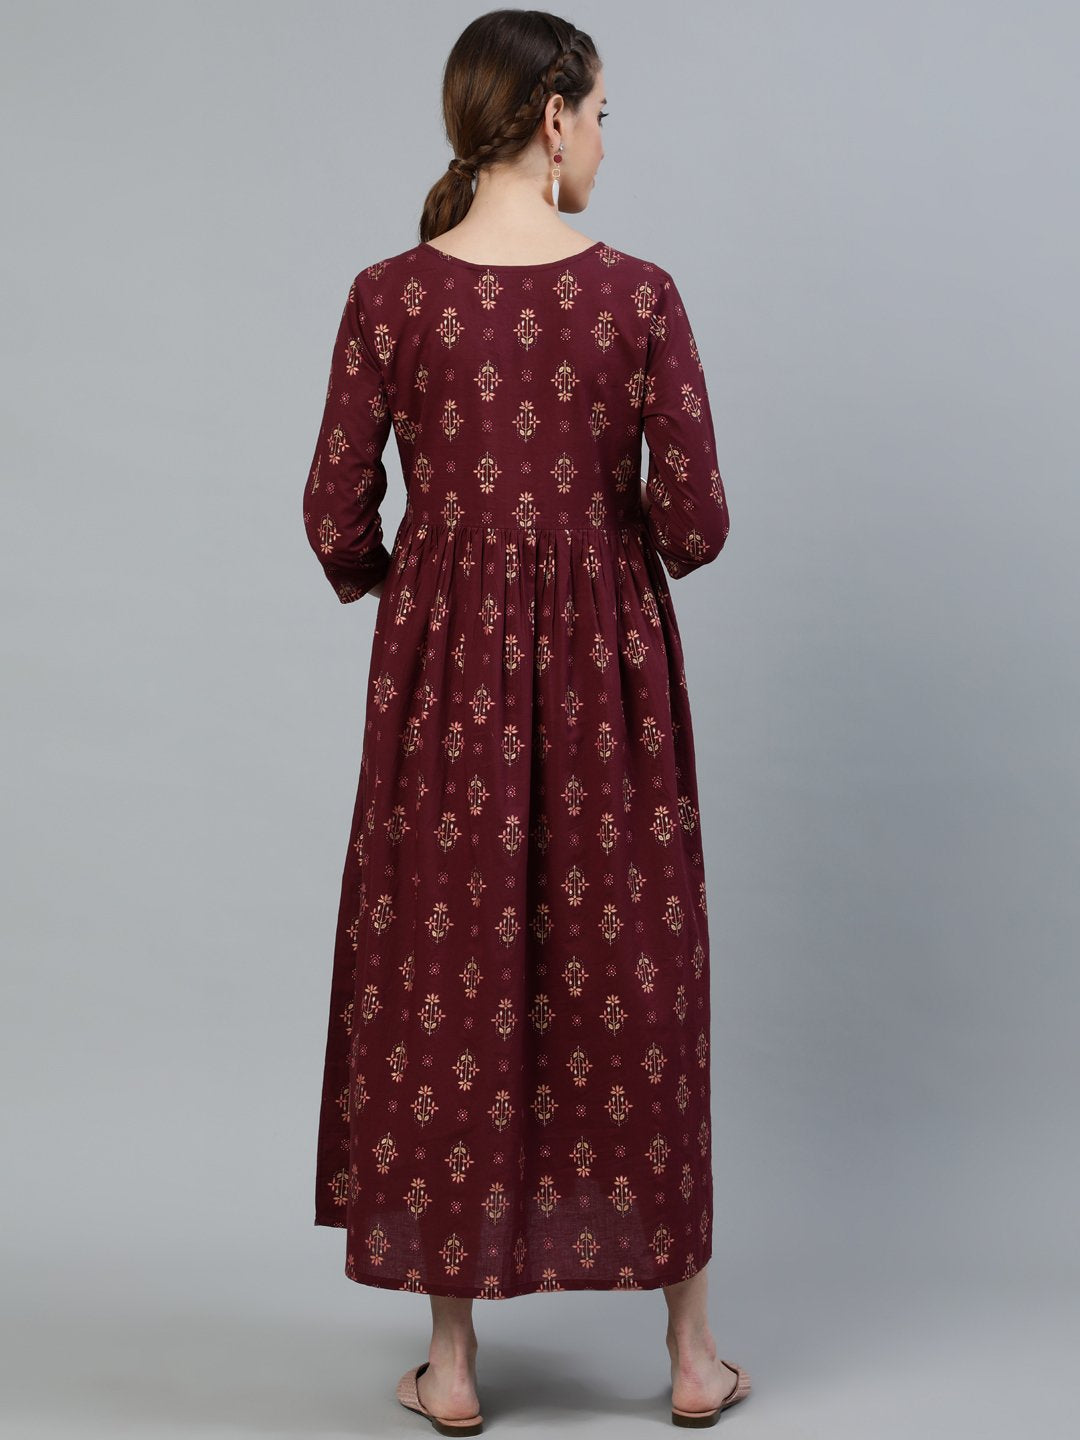 Women's Maroon Printed Flared Maternity Dress With Three Quarters Sleeves & Belt - Nayo Clothing